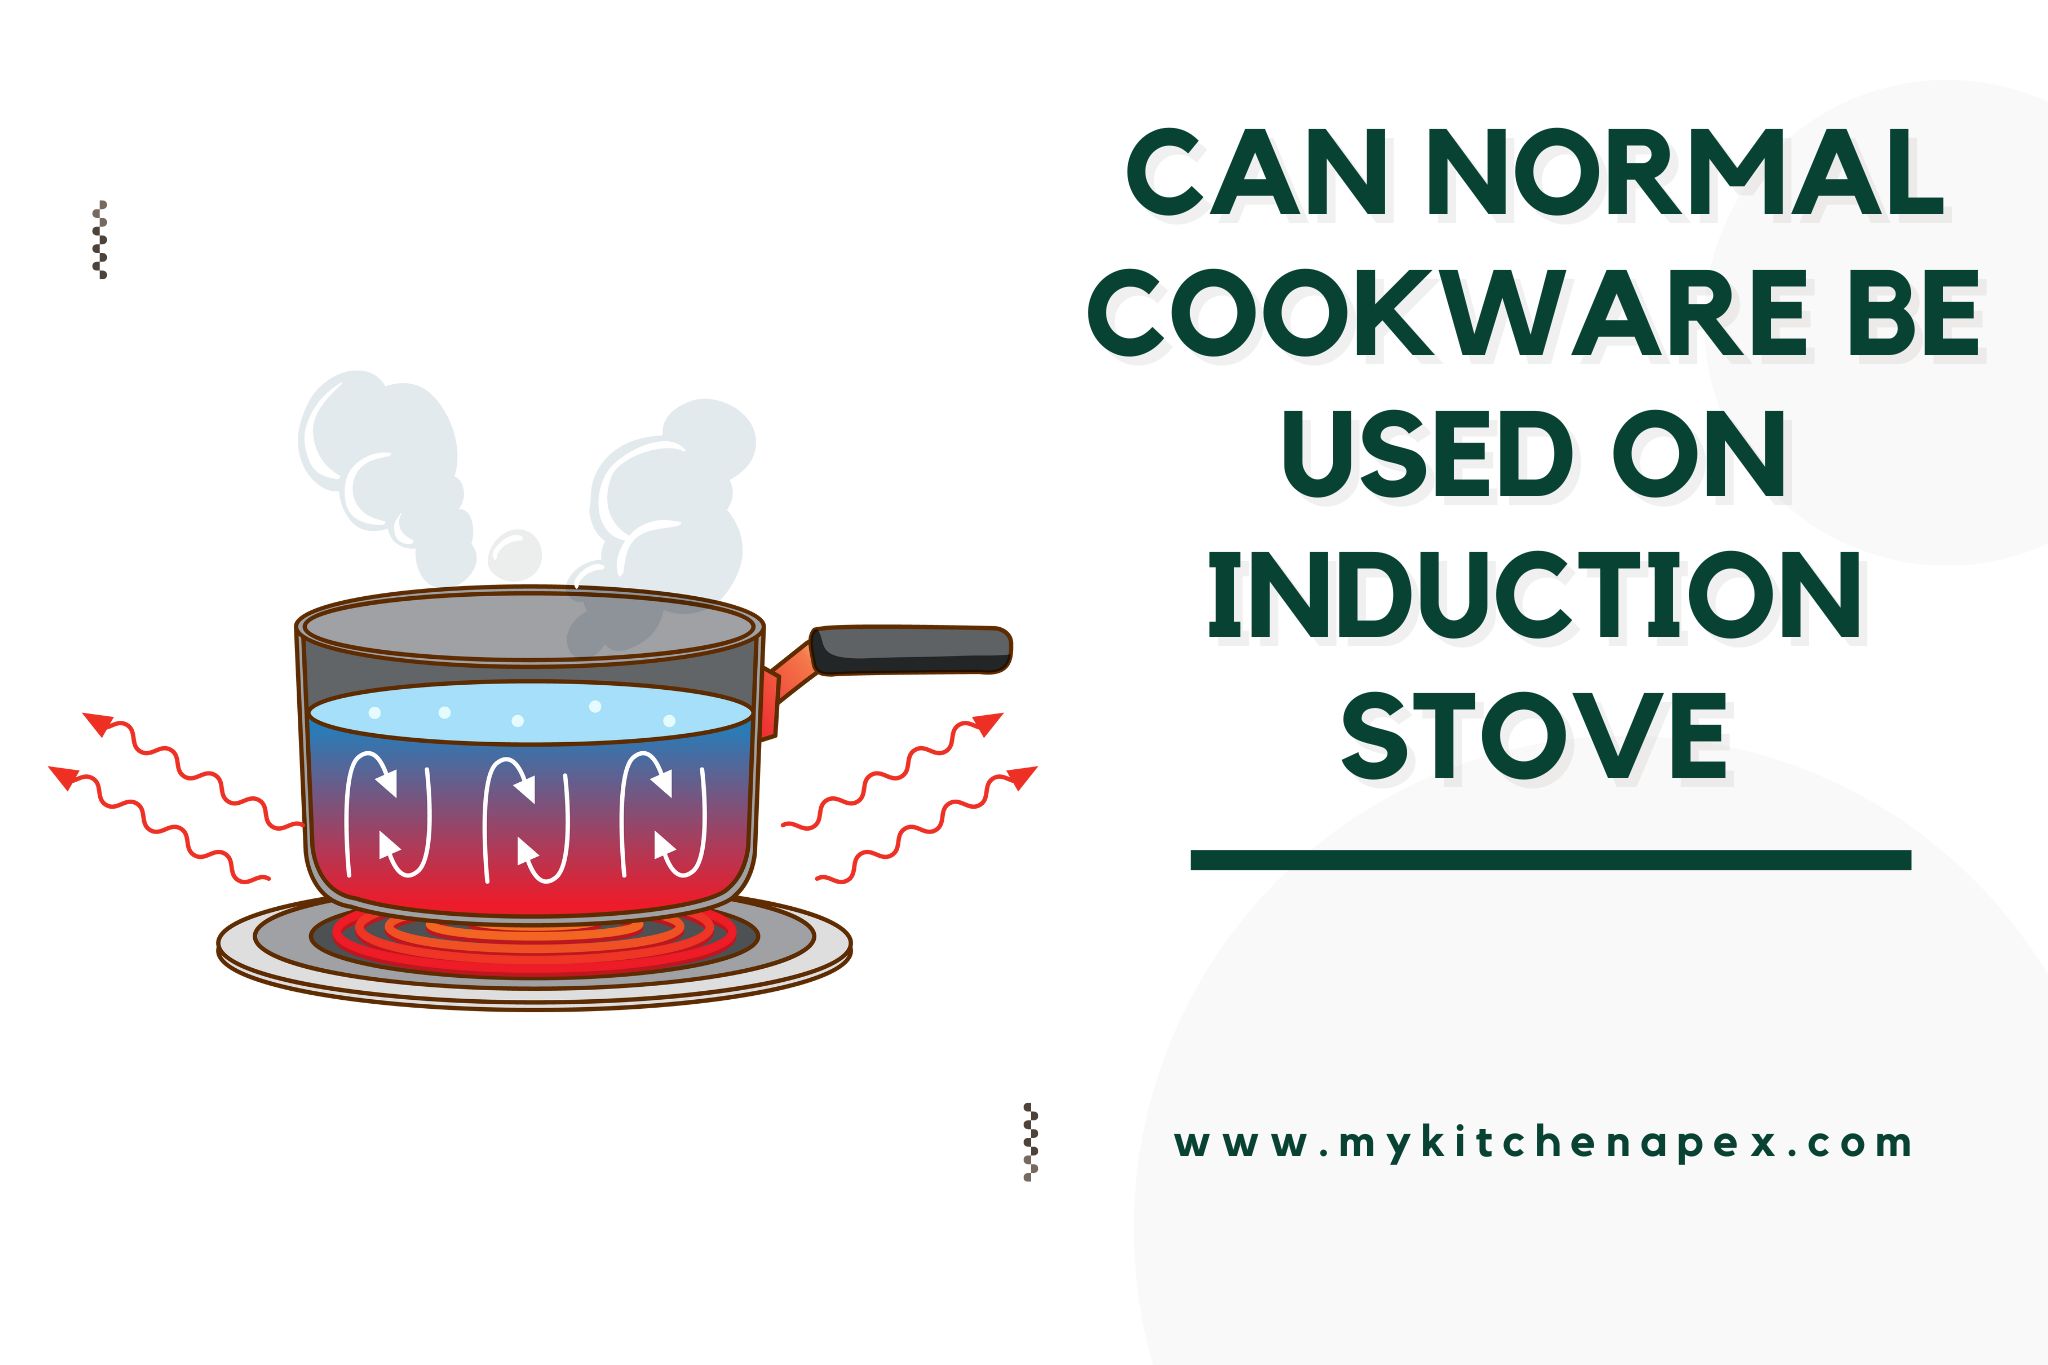 can normal cookware be used on induction stove